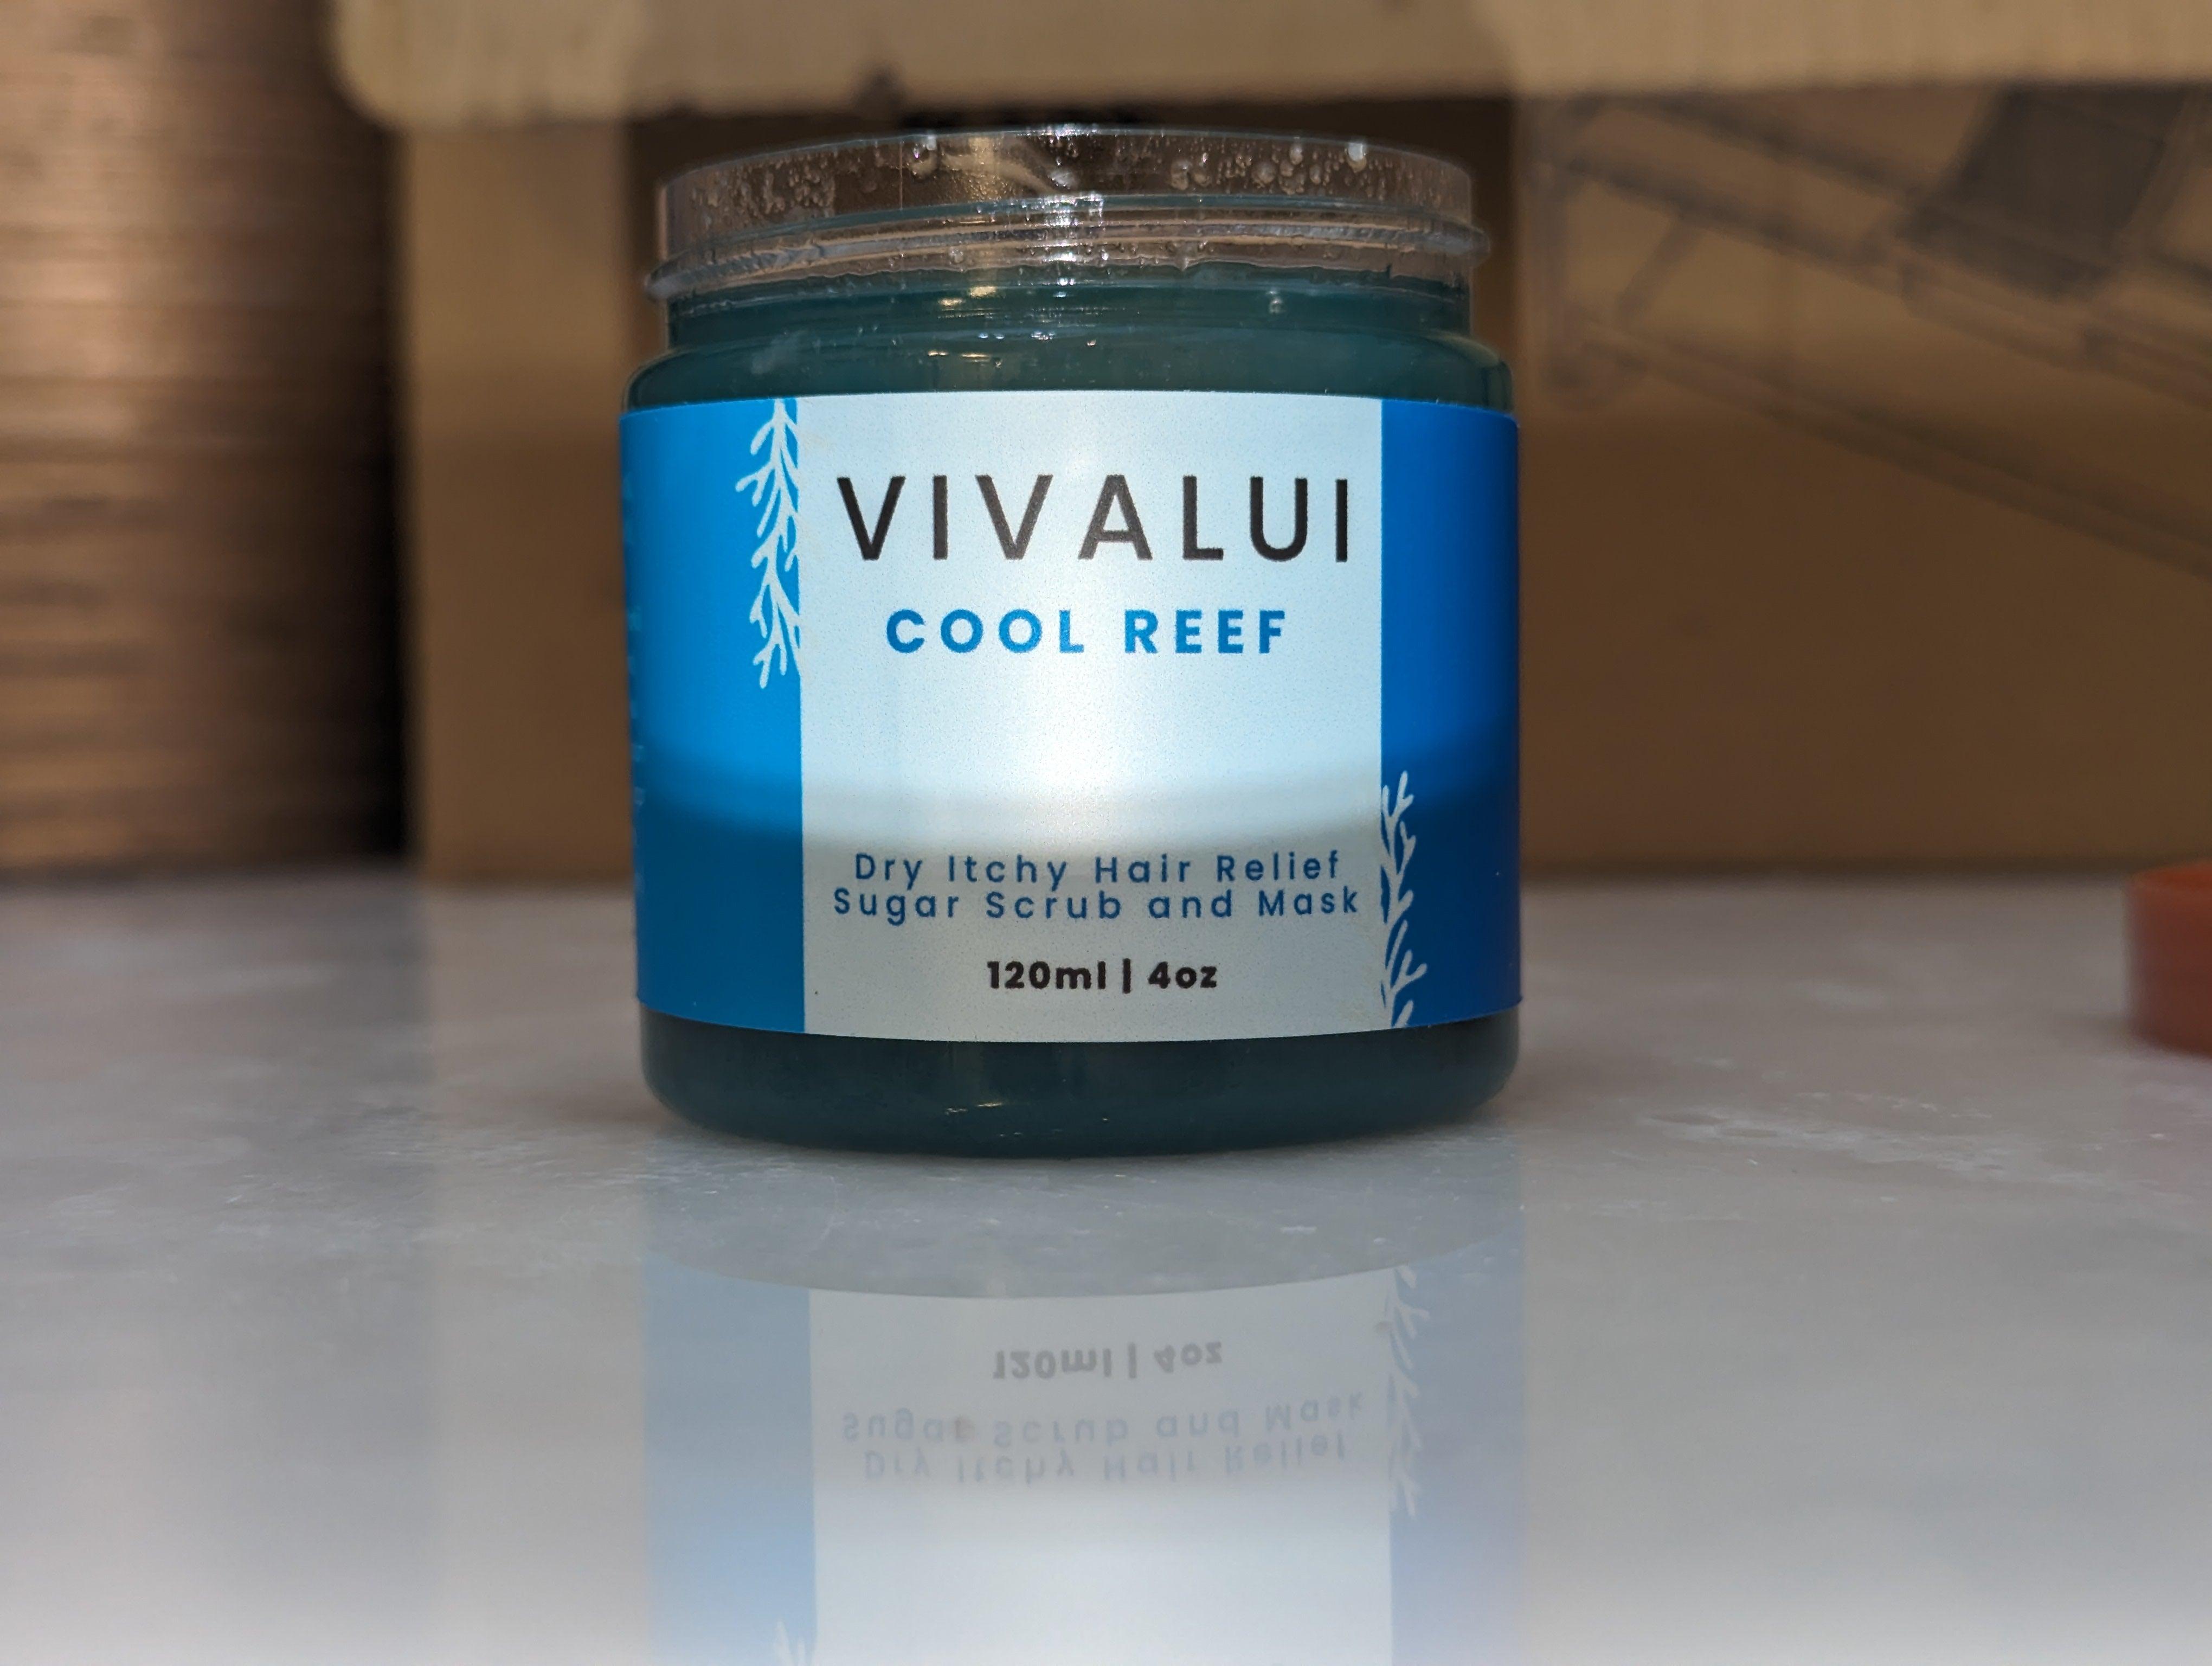 Vivalui cool reef dry itchy hair and scalp relief sugar scrub and mask - VIVALUI